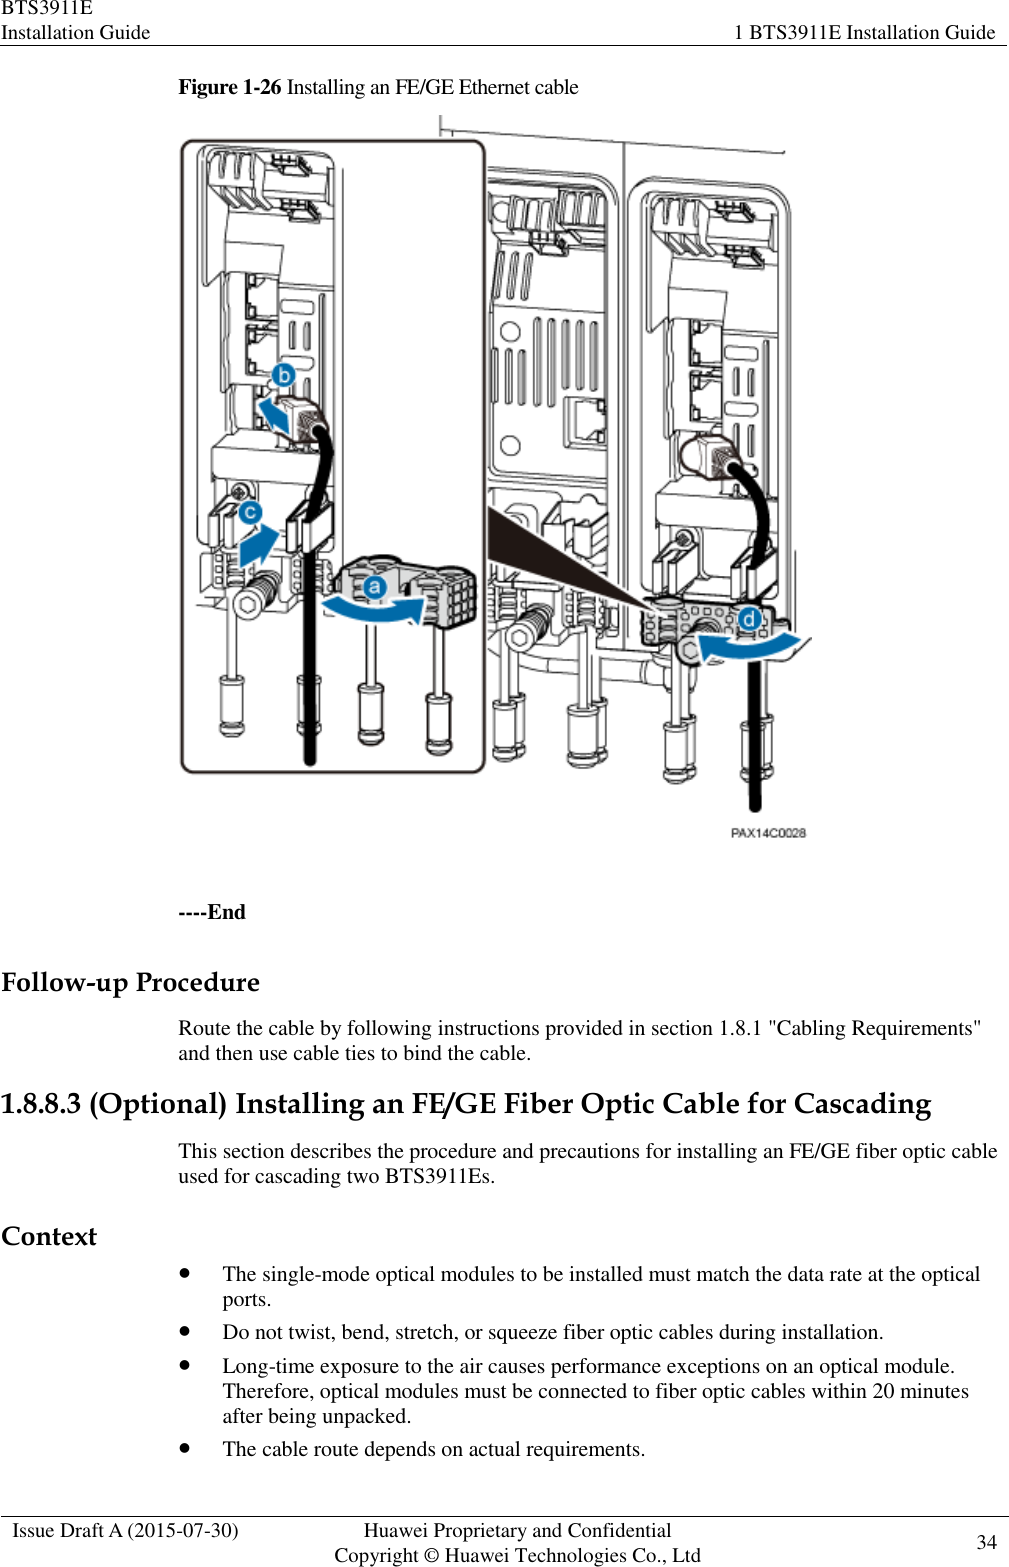 BTS3911E Installation Guide 1 BTS3911E Installation Guide  Issue Draft A (2015-07-30) Huawei Proprietary and Confidential           Copyright © Huawei Technologies Co., Ltd 34    Figure 1-26 Installing an FE/GE Ethernet cable   ----End Follow-up Procedure Route the cable by following instructions provided in section 1.8.1 &quot;Cabling Requirements&quot; and then use cable ties to bind the cable. 1.8.8.3 (Optional) Installing an FE/GE Fiber Optic Cable for Cascading This section describes the procedure and precautions for installing an FE/GE fiber optic cable used for cascading two BTS3911Es. Context  The single-mode optical modules to be installed must match the data rate at the optical ports.  Do not twist, bend, stretch, or squeeze fiber optic cables during installation.  Long-time exposure to the air causes performance exceptions on an optical module. Therefore, optical modules must be connected to fiber optic cables within 20 minutes after being unpacked.  The cable route depends on actual requirements. 